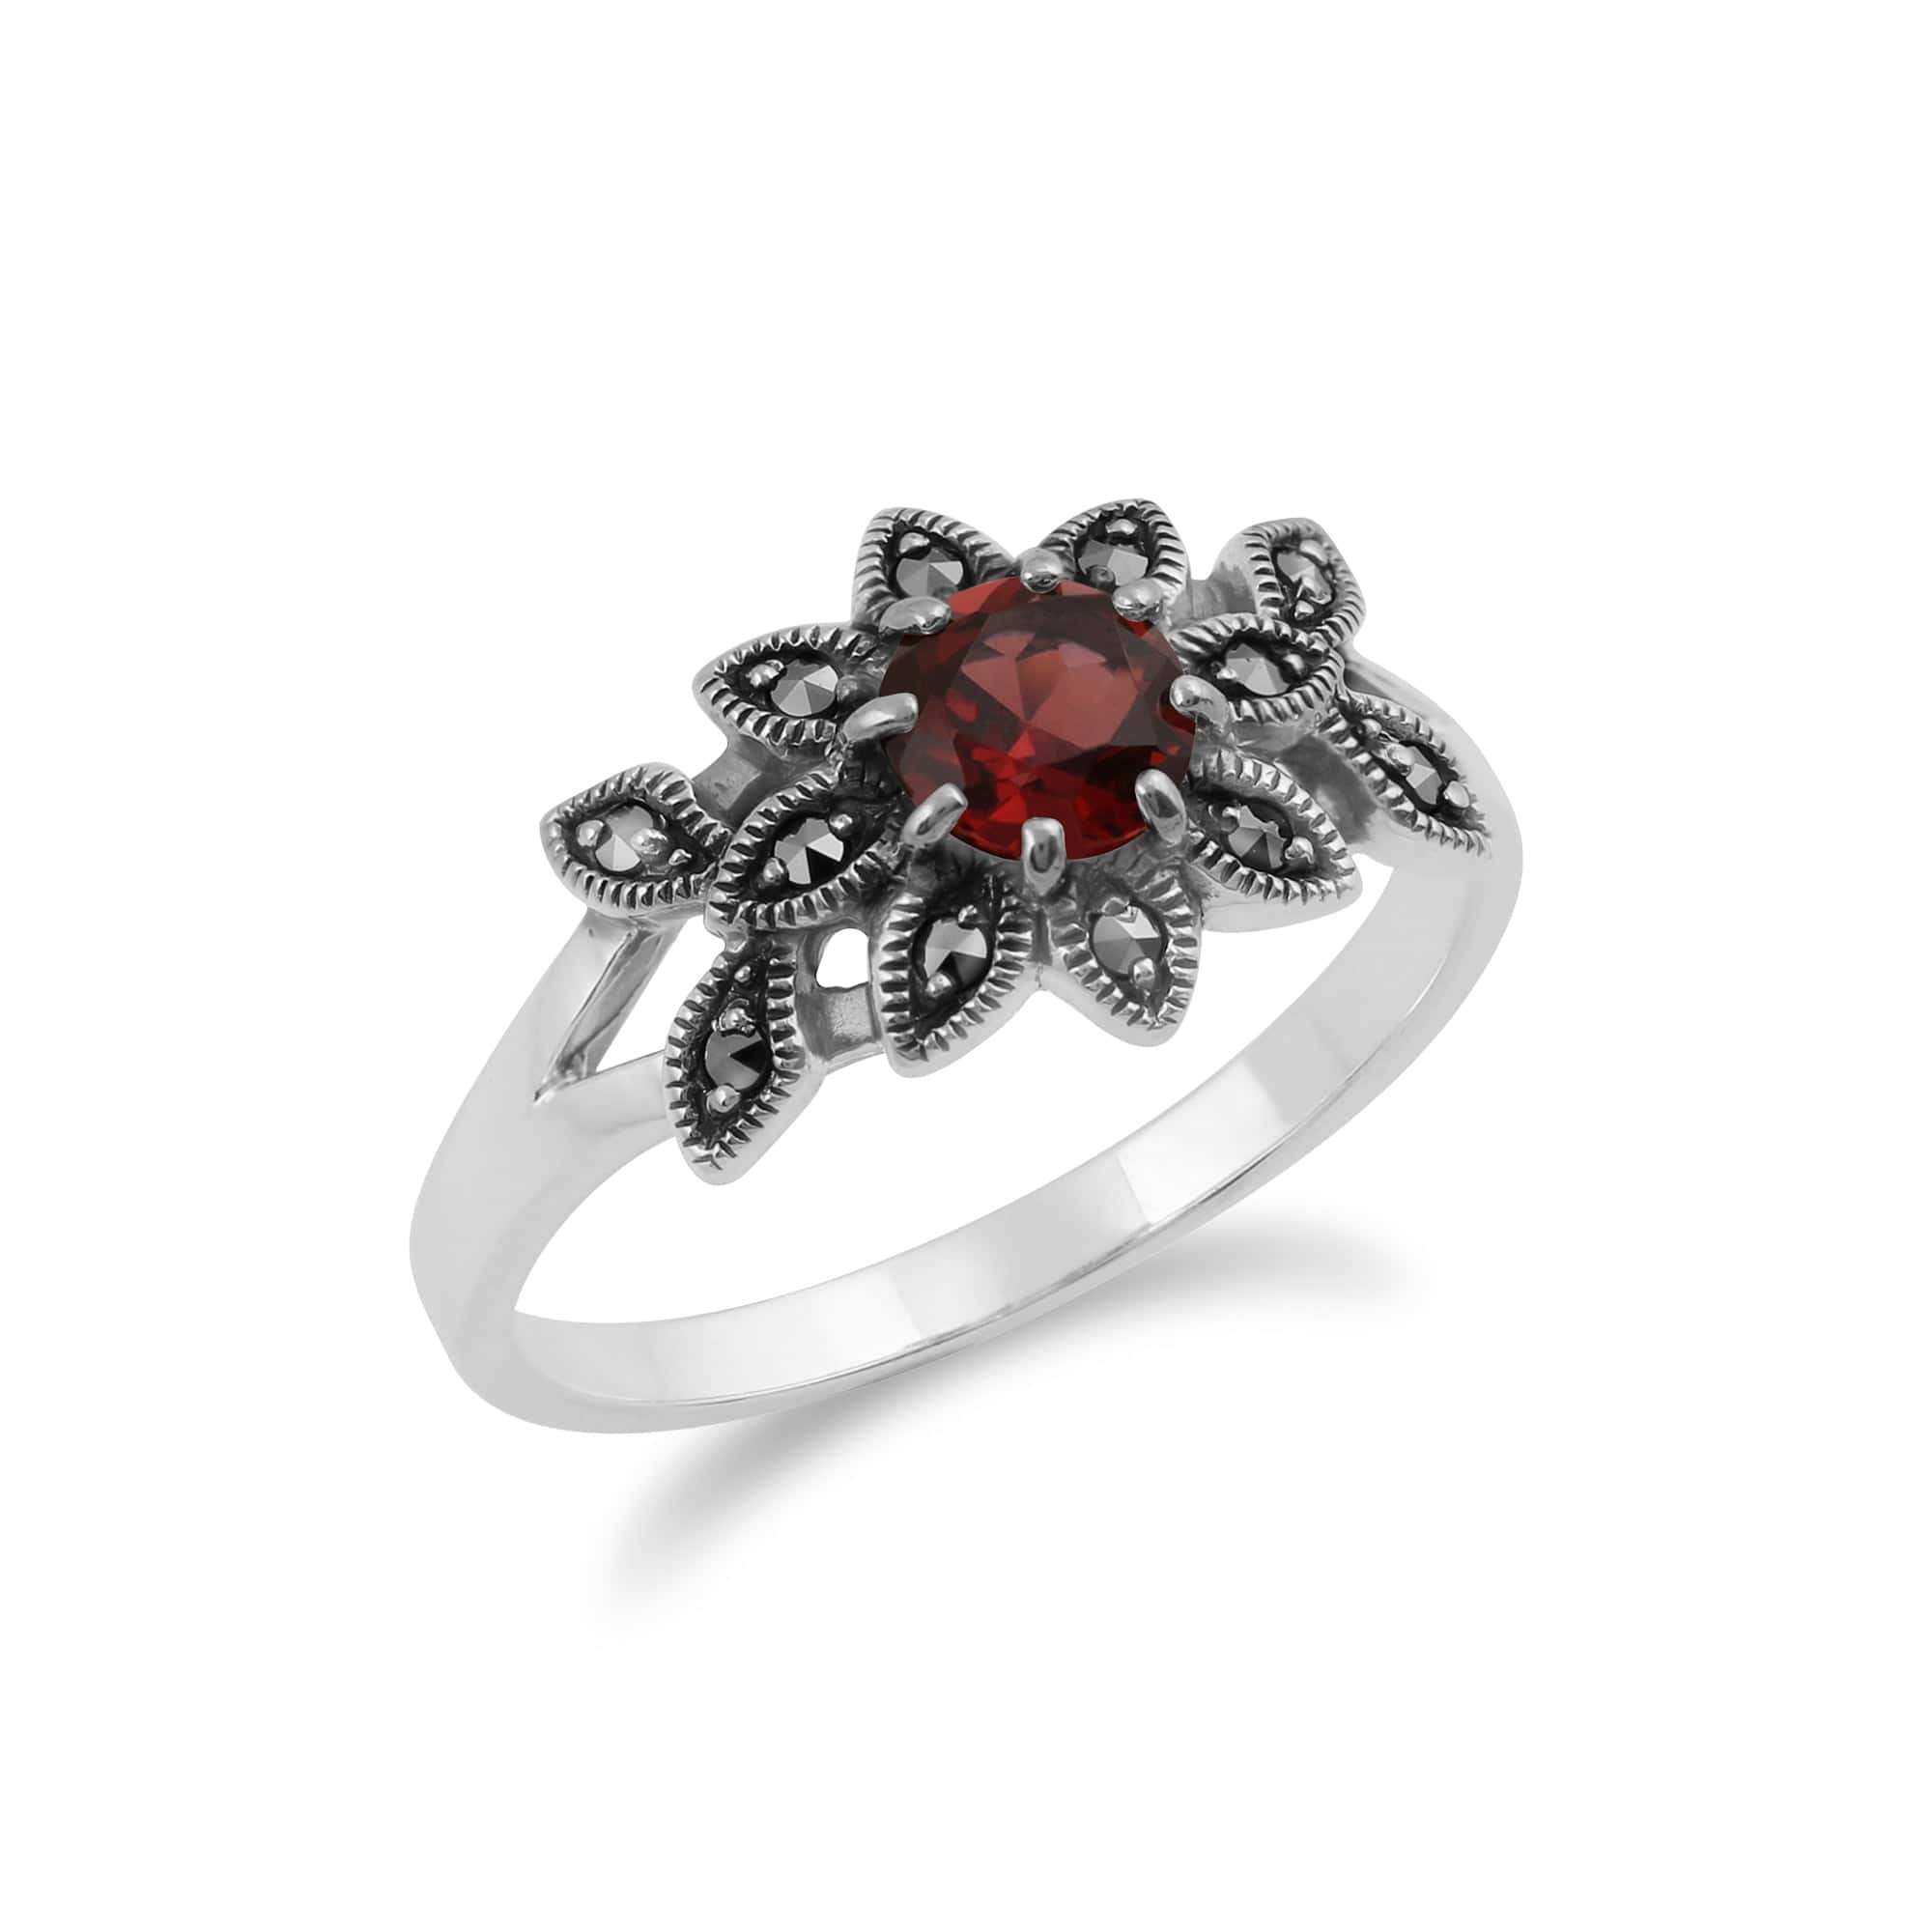 214R467705925 Art Nouveau Style Round Garnet & Marcasite Floral Ring in Sterling Silver 2